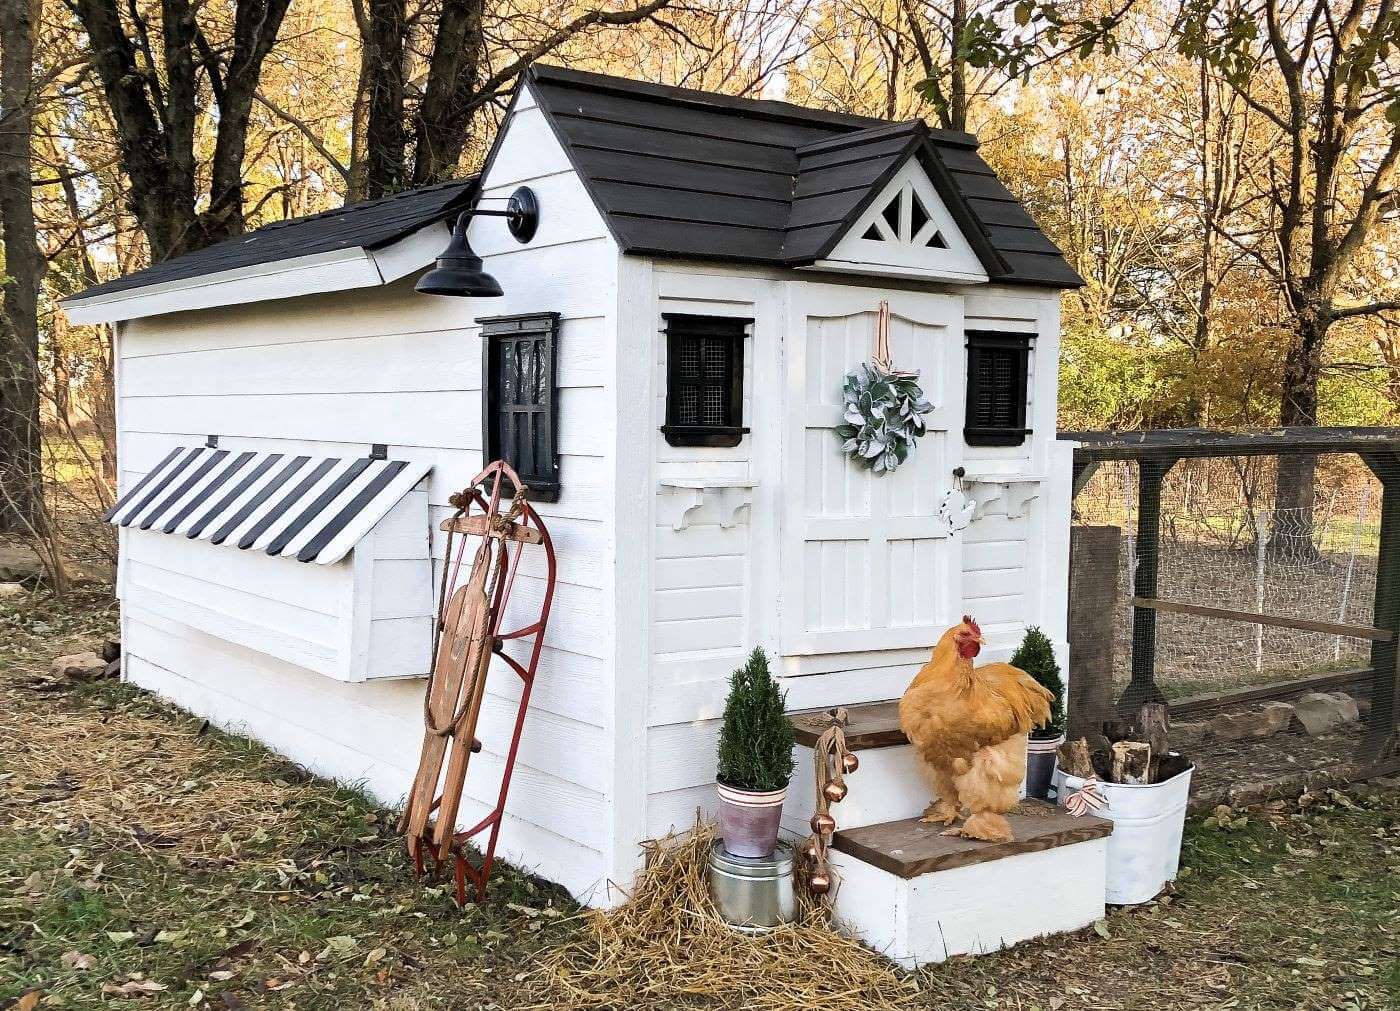 Winterize the chicken coop with festive decor for winter